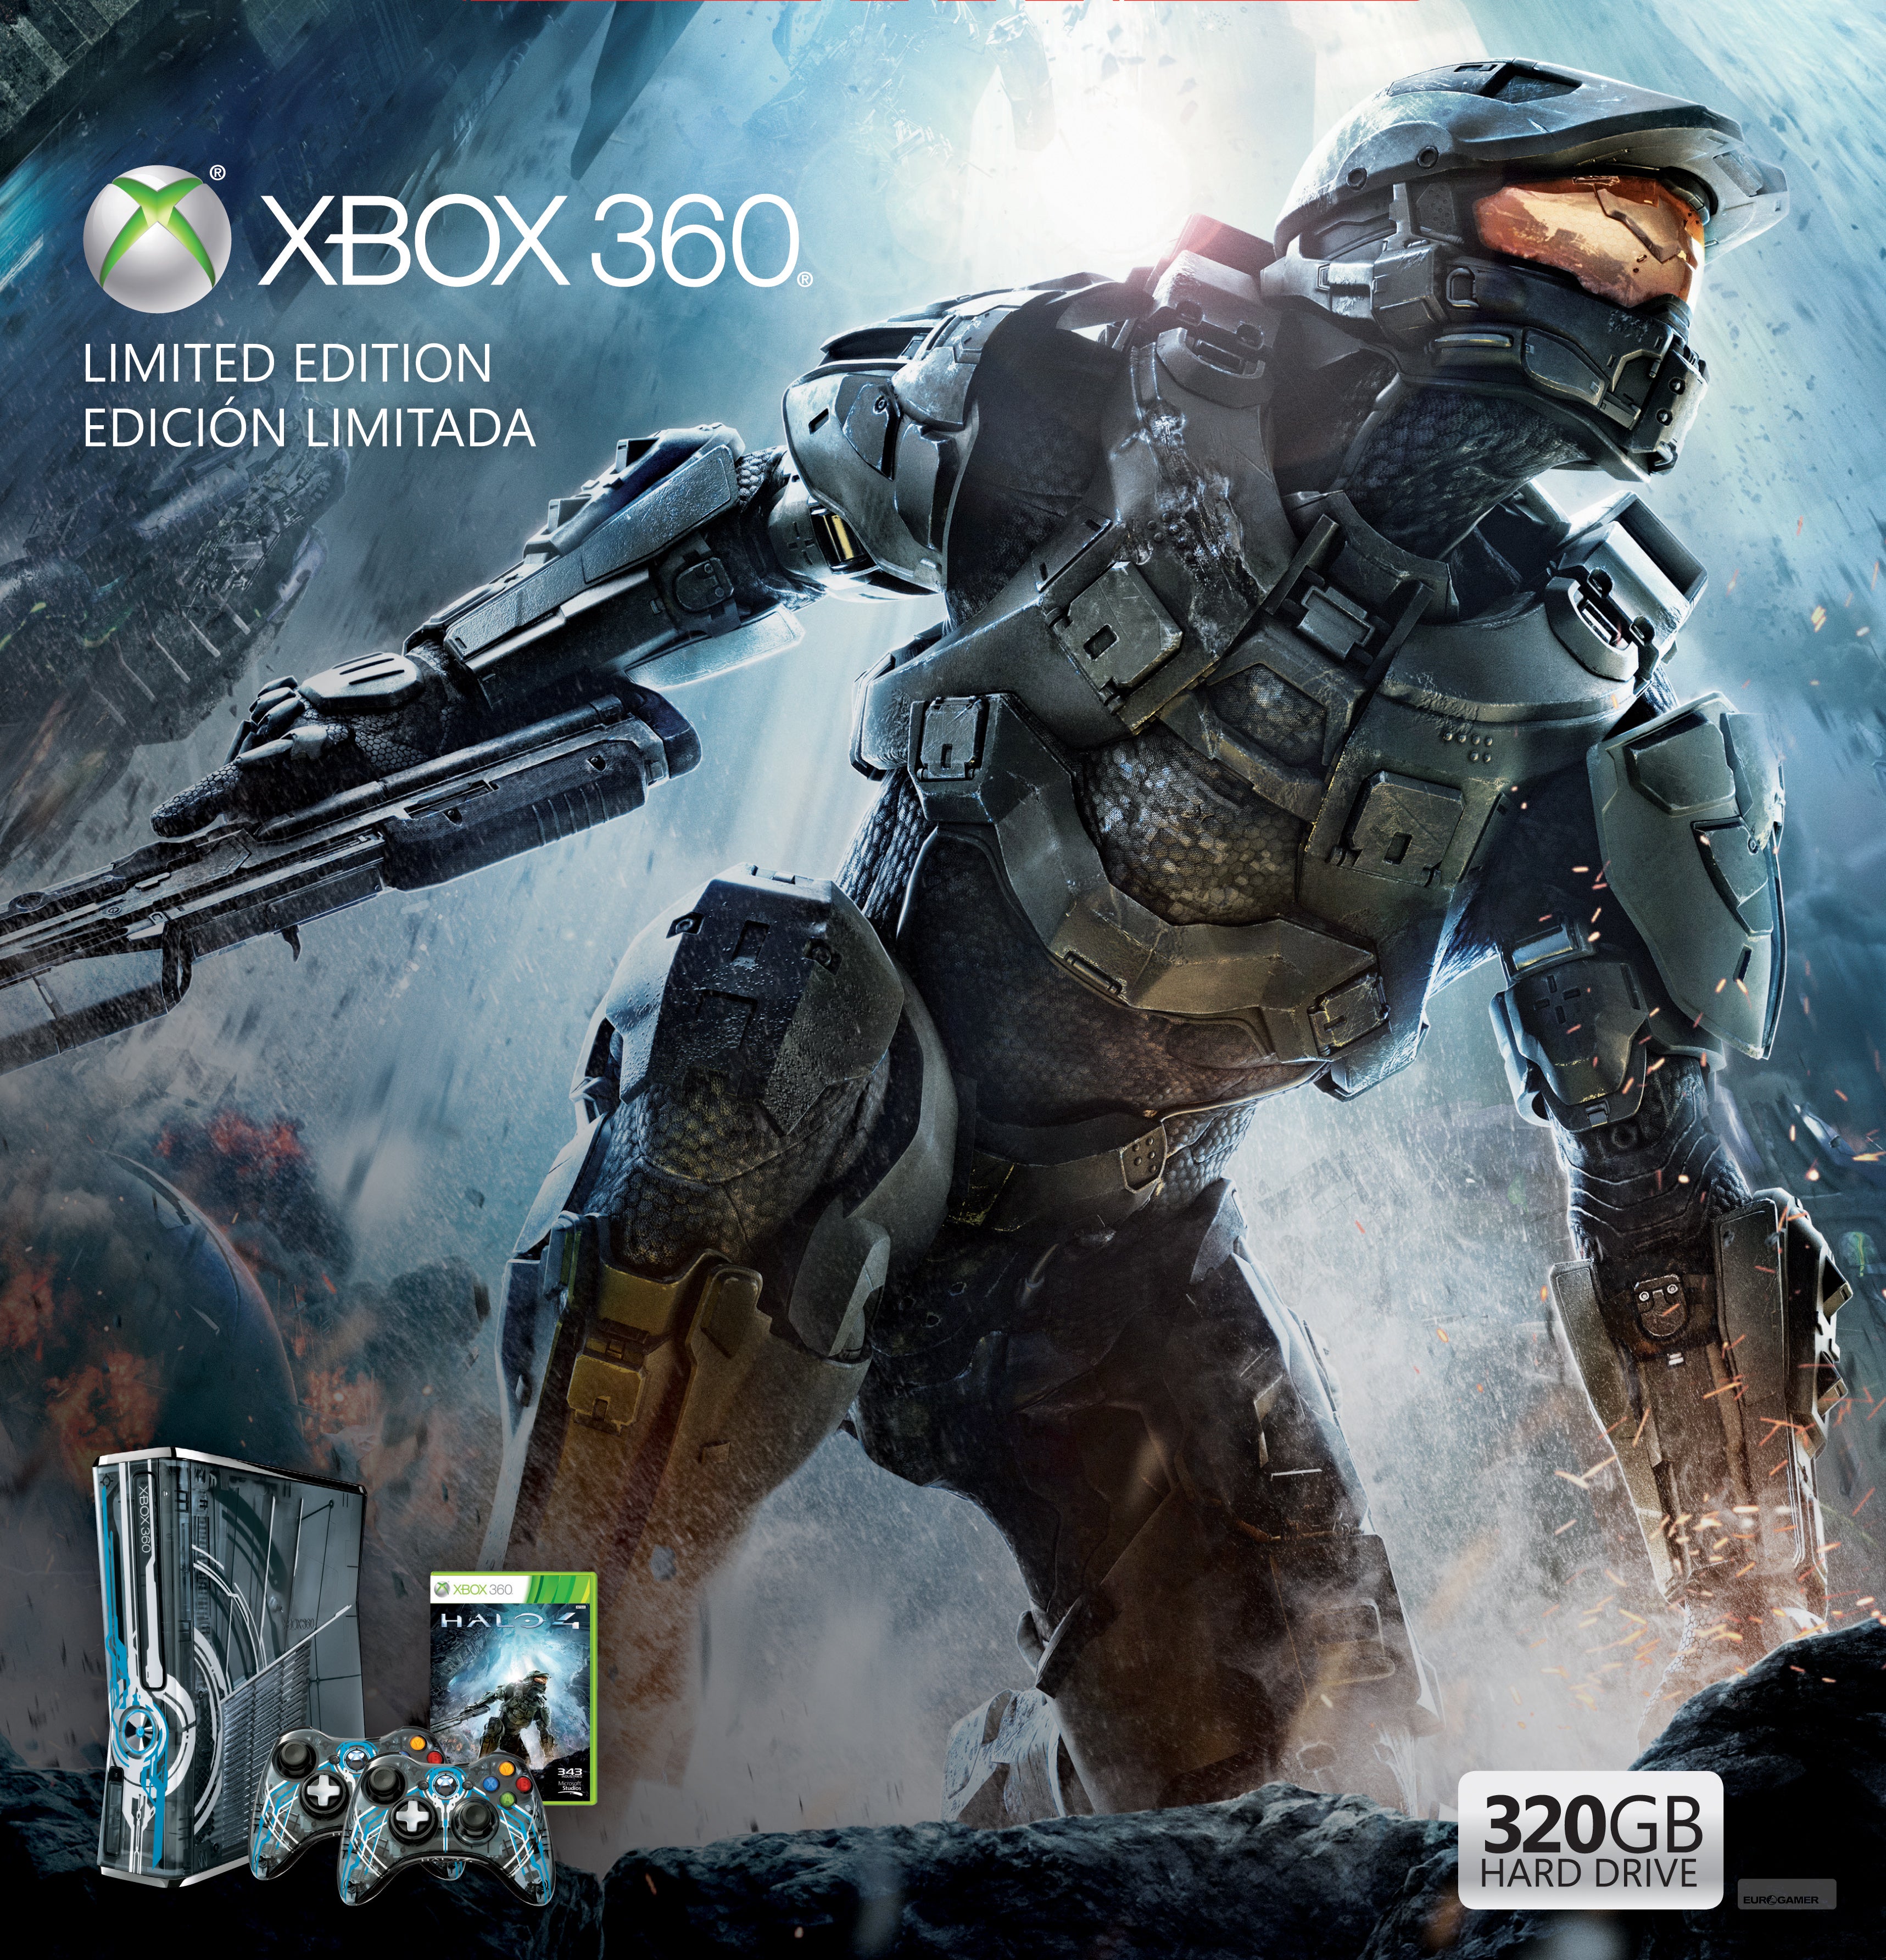 Translucent Halo 4 Limited Edition Xbox 360 costs £269.99